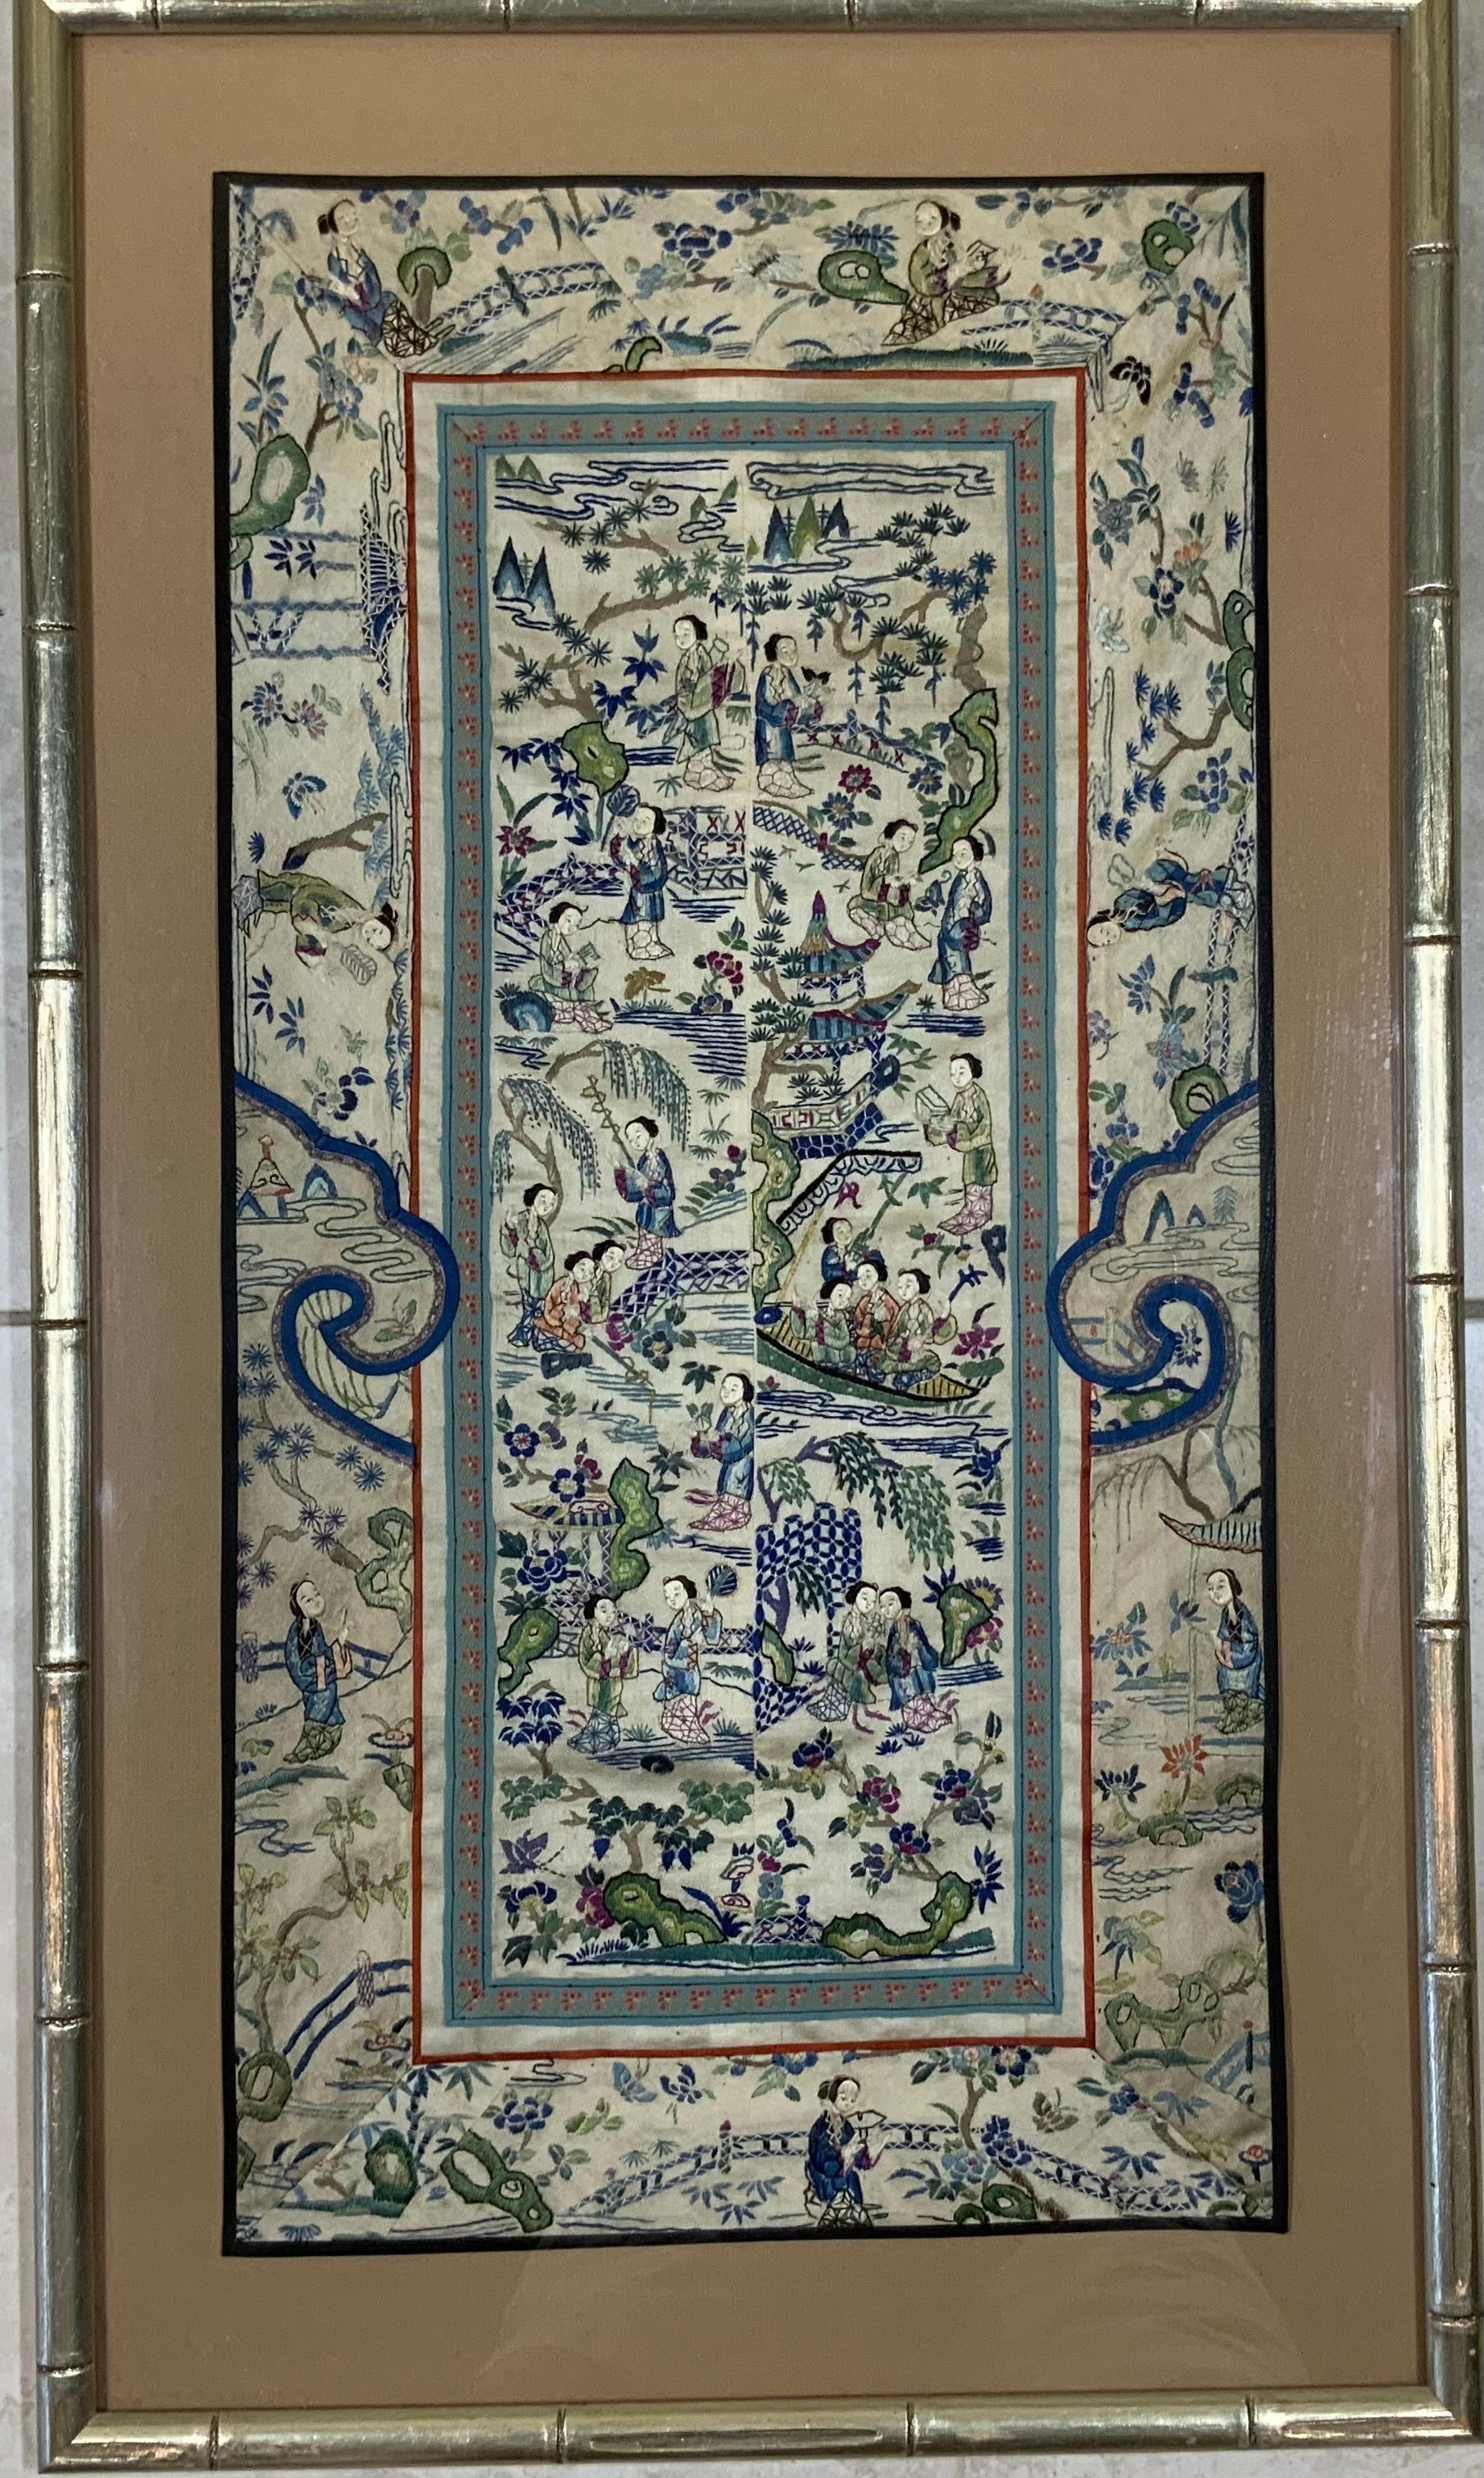 A spectacular antique Chinese embroidery panel dated from (circa 19th century), professionally framed with linen mat, purchased from Antique Chinese collector This example, entailed with many stitch techniques including, satin, couching, extensive